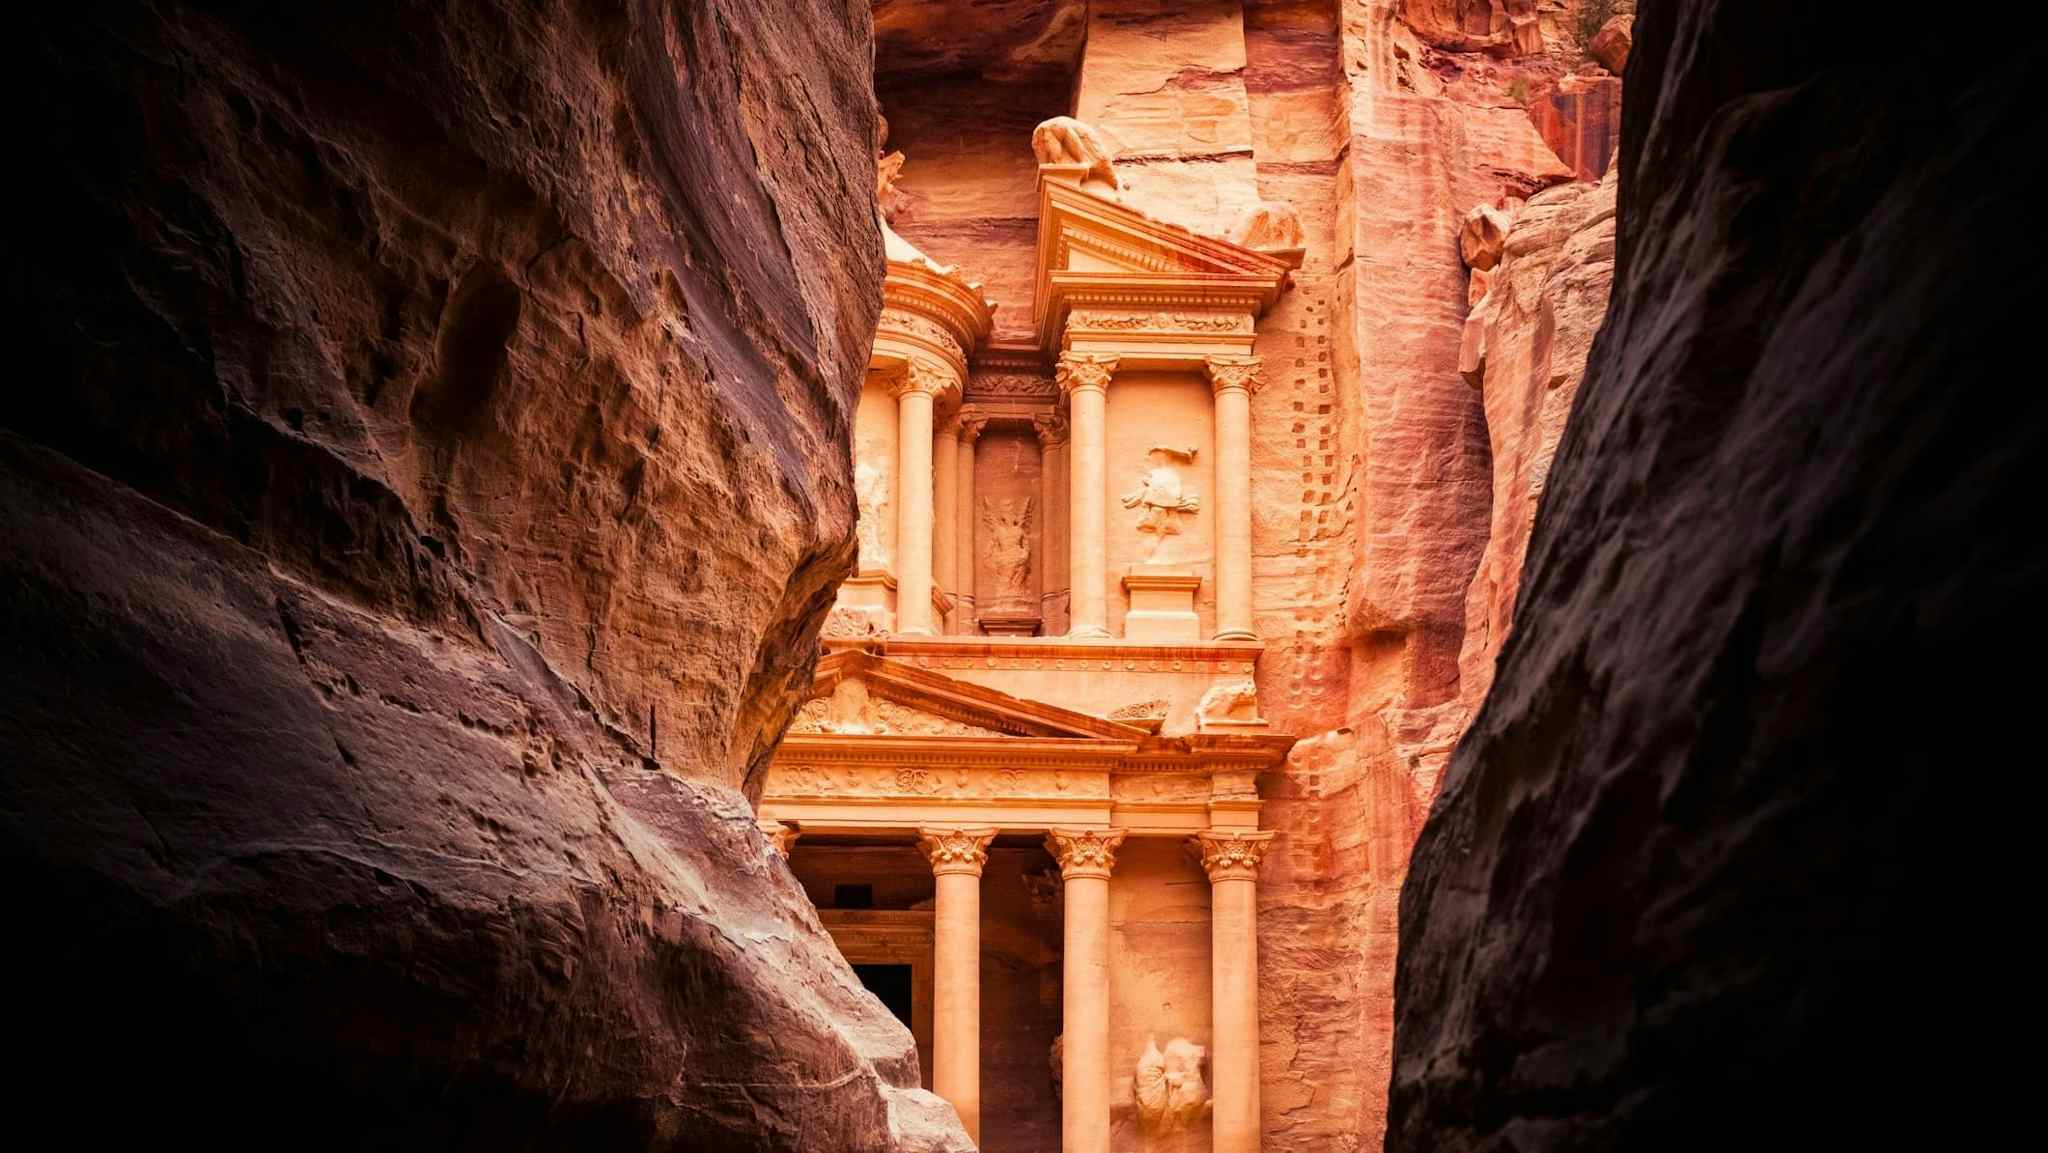 The end of the Siq, with its dramatic view of Al Khazneh ('The Treasury'), Jordan. Photo: iStock-467158379